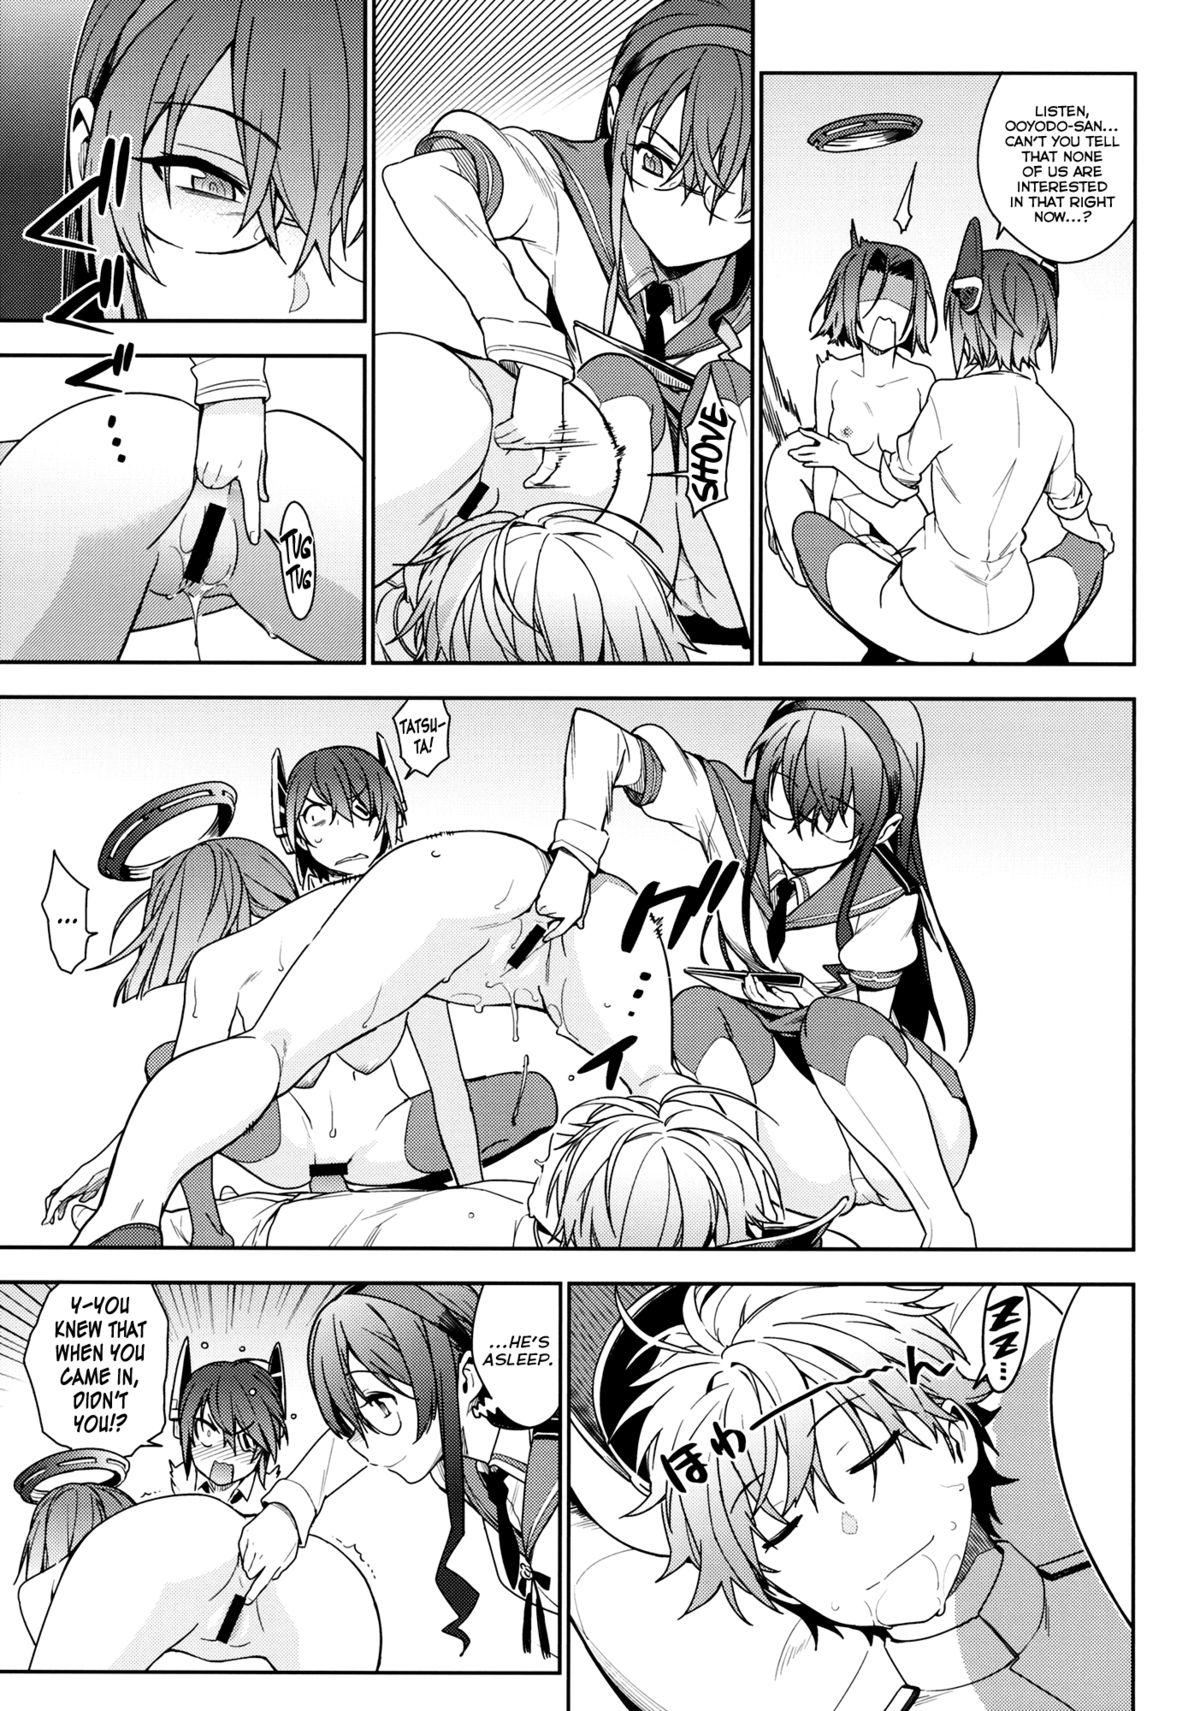 Grande THE LAST ORDER - Kantai collection Teenage Sex - Page 8